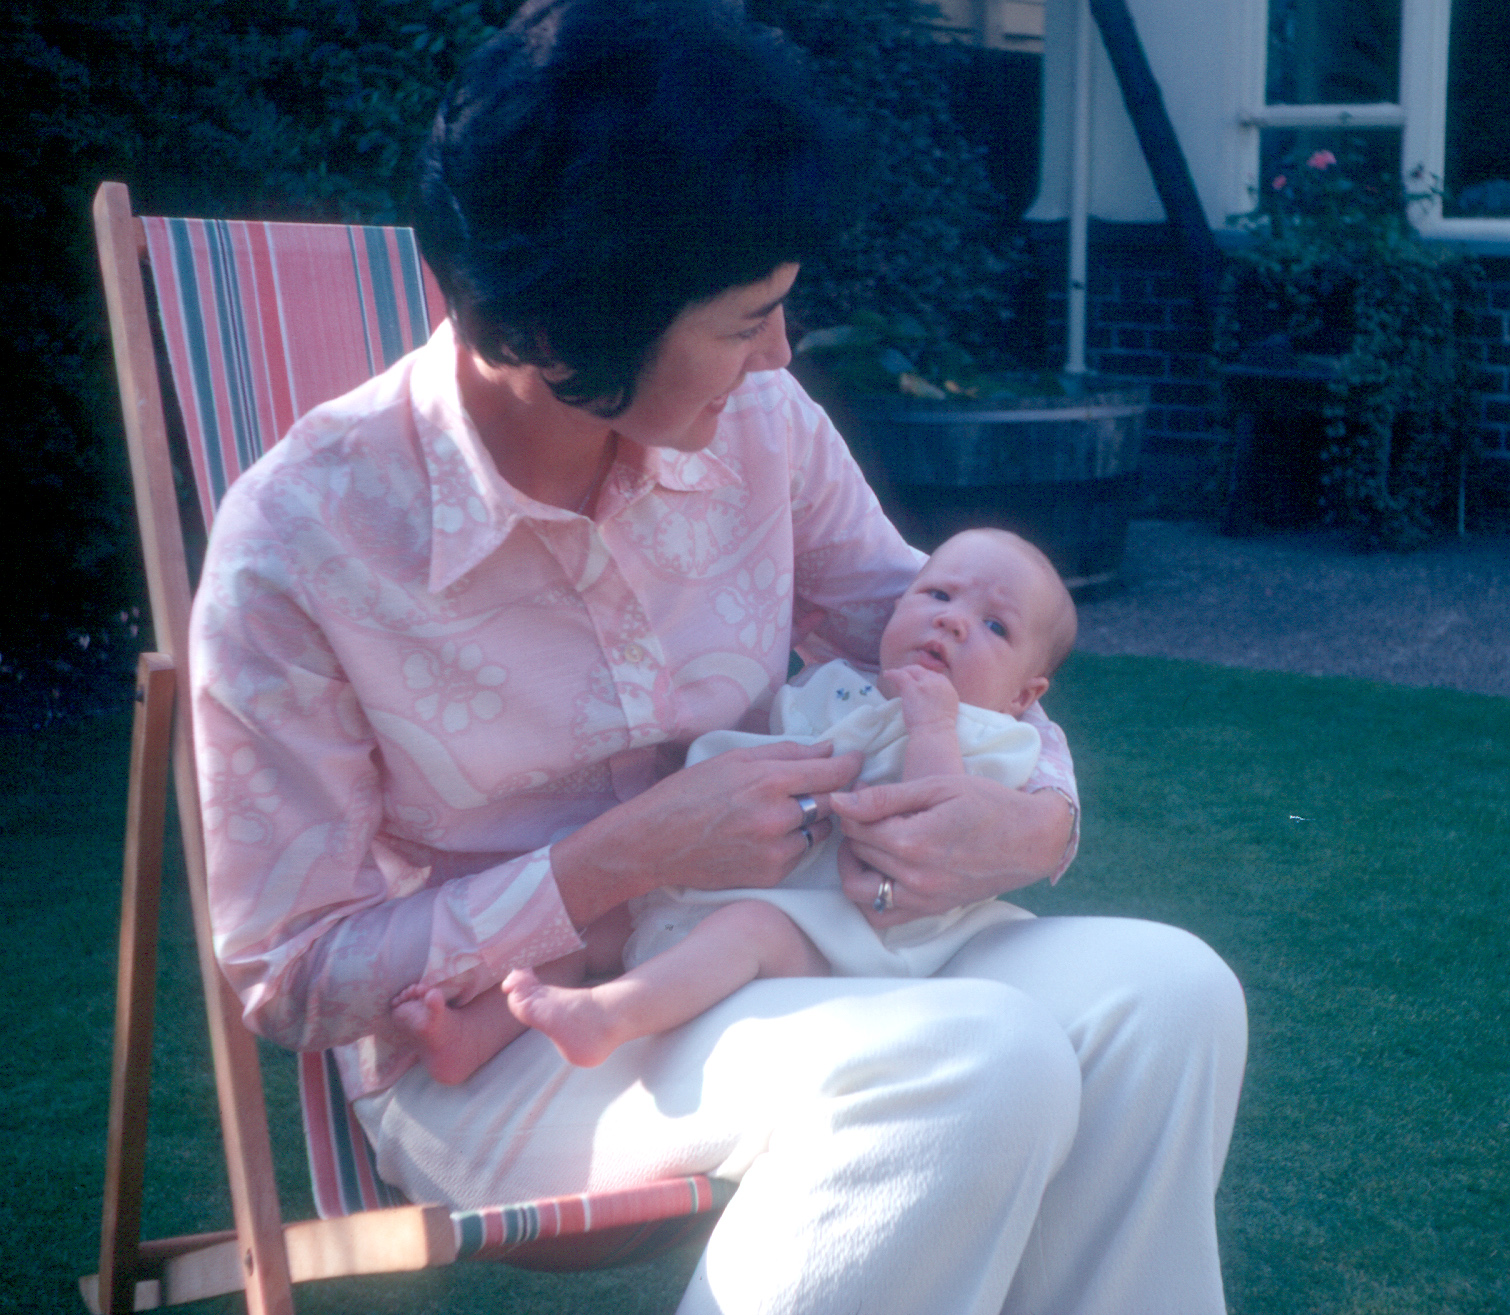 30 Aug 1970 Elizabeth holding Susan who is about 7 weeks old